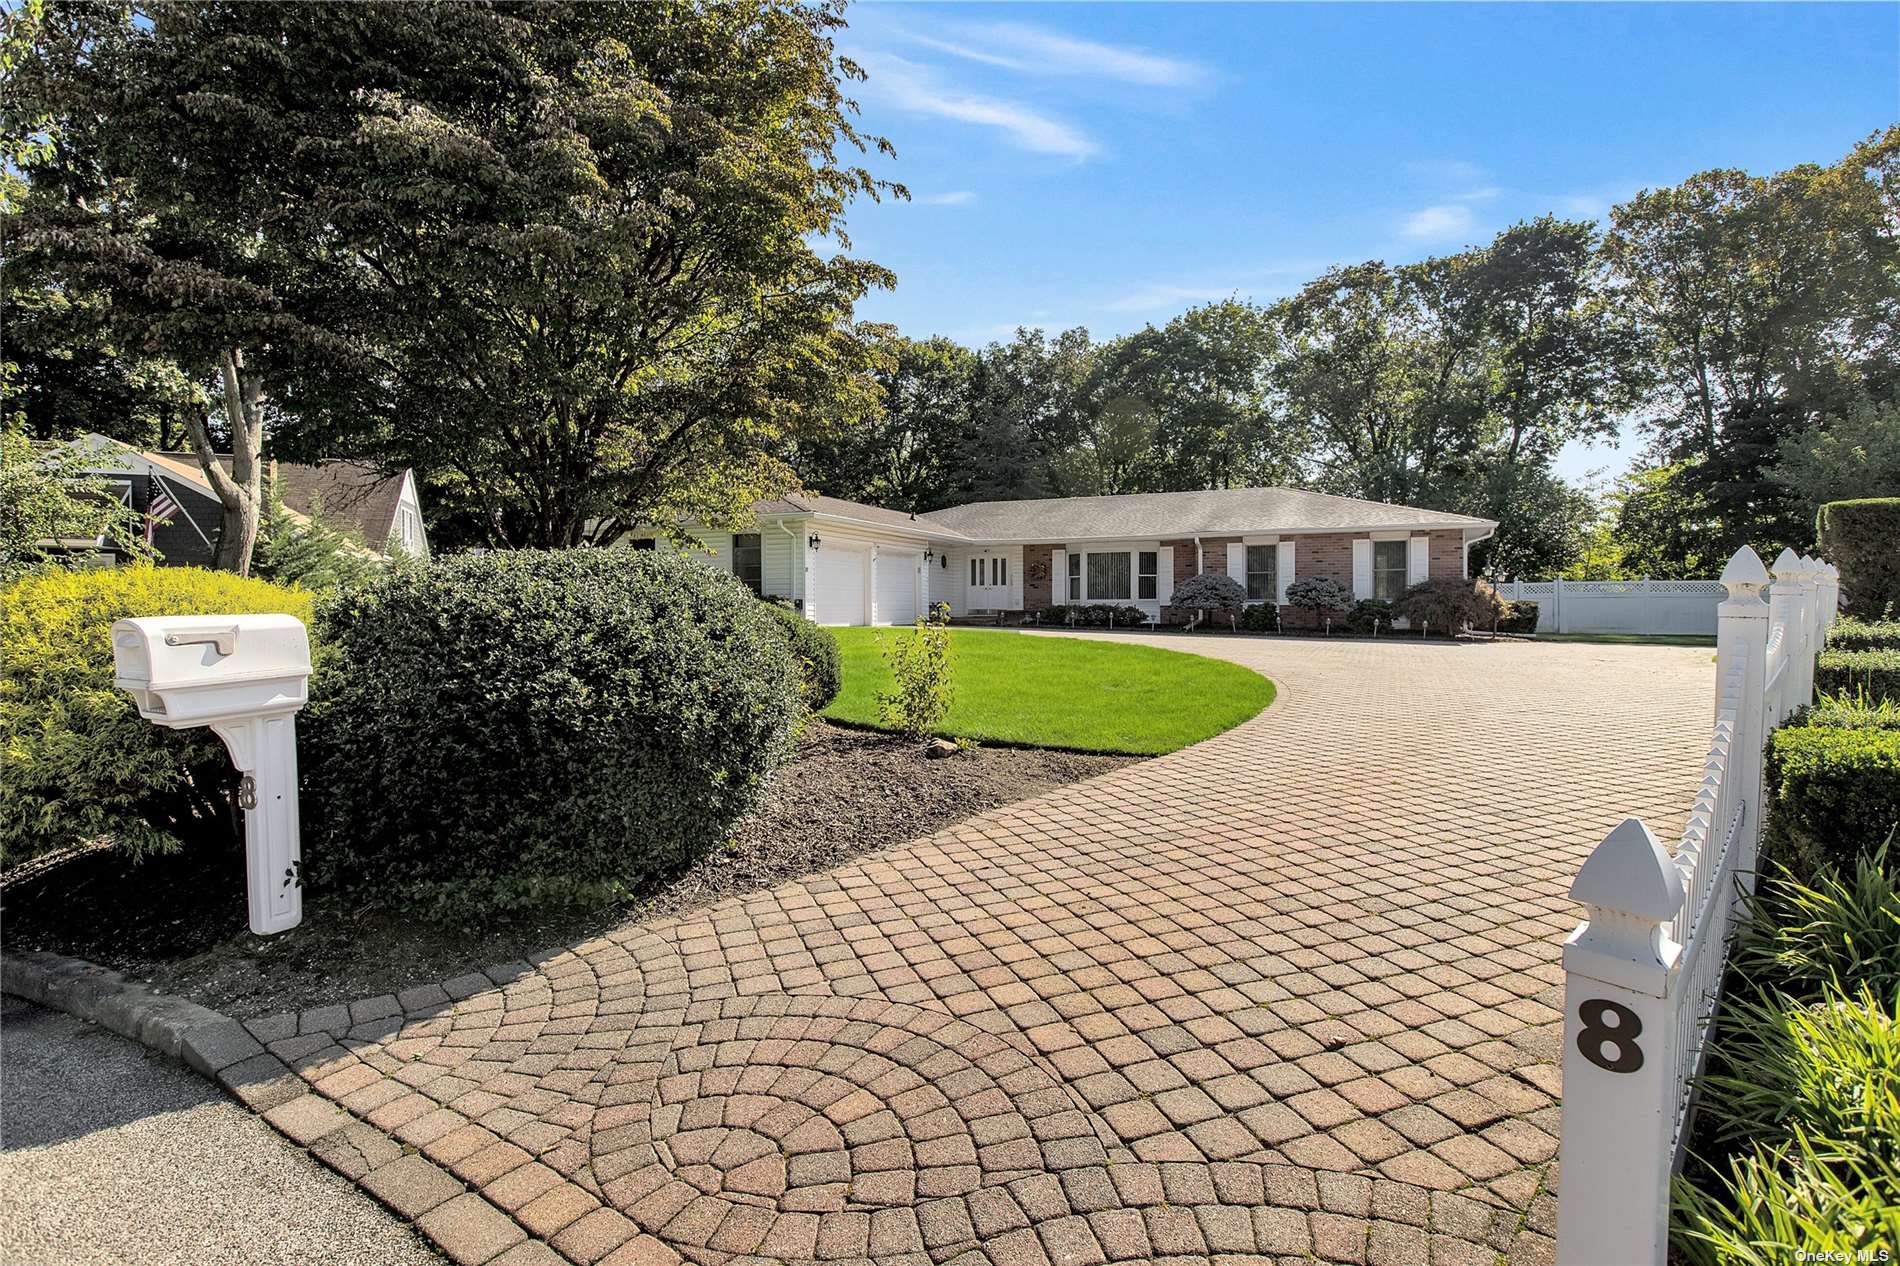 Property for Sale at 8 Half Acre, Smithtown, Hamptons, NY - Bedrooms: 4 
Bathrooms: 3  - $825,000